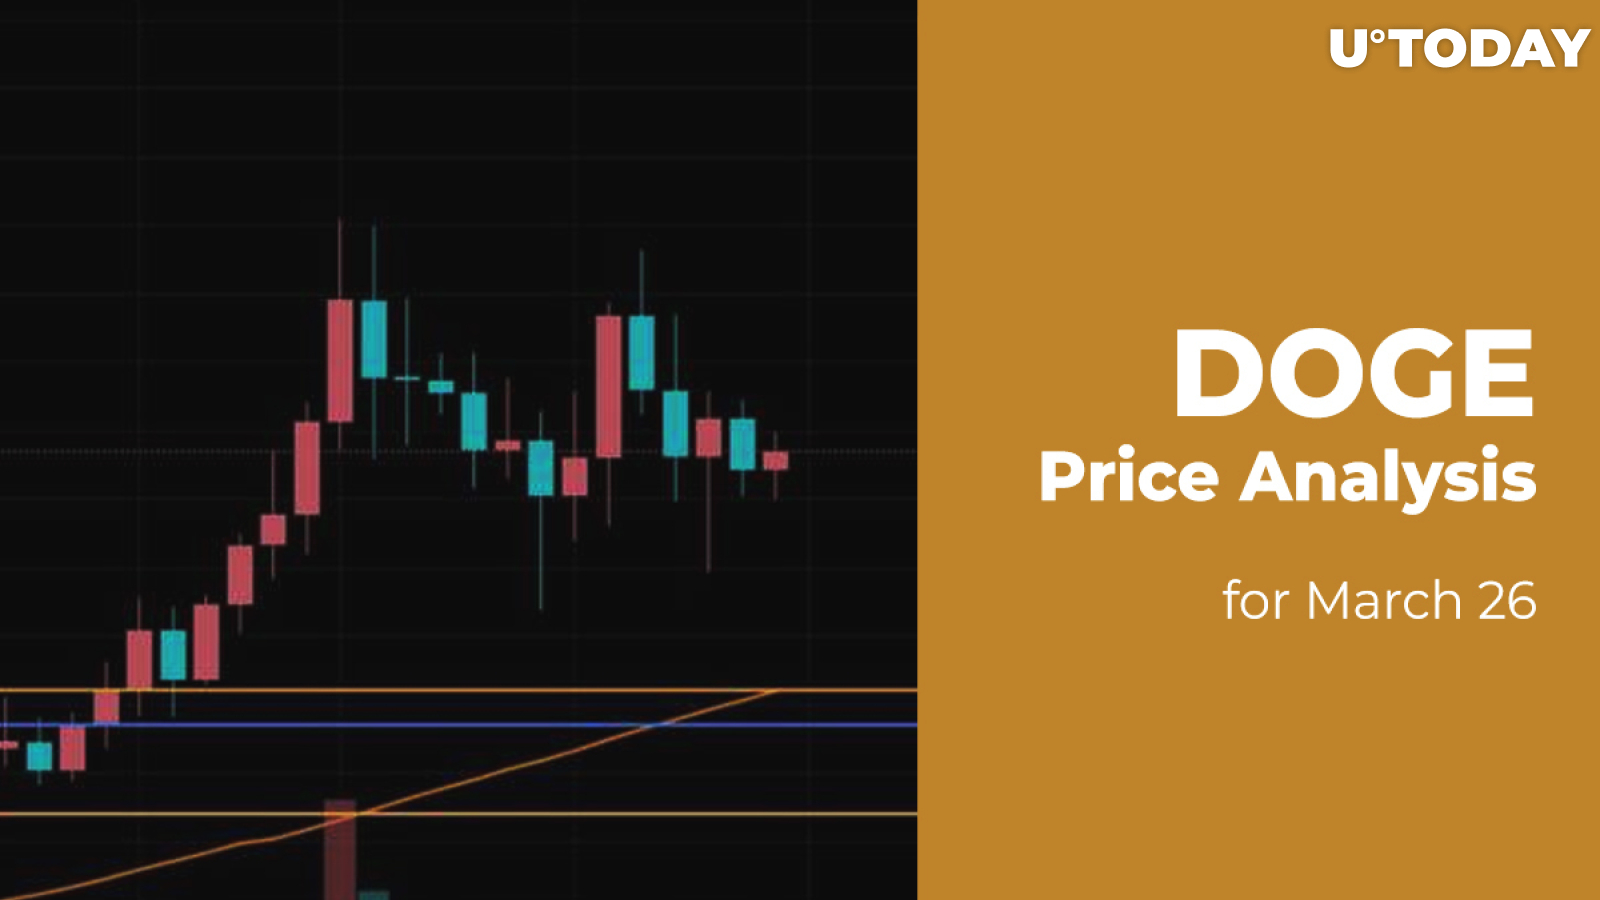 DOGE Price Analysis for March 26